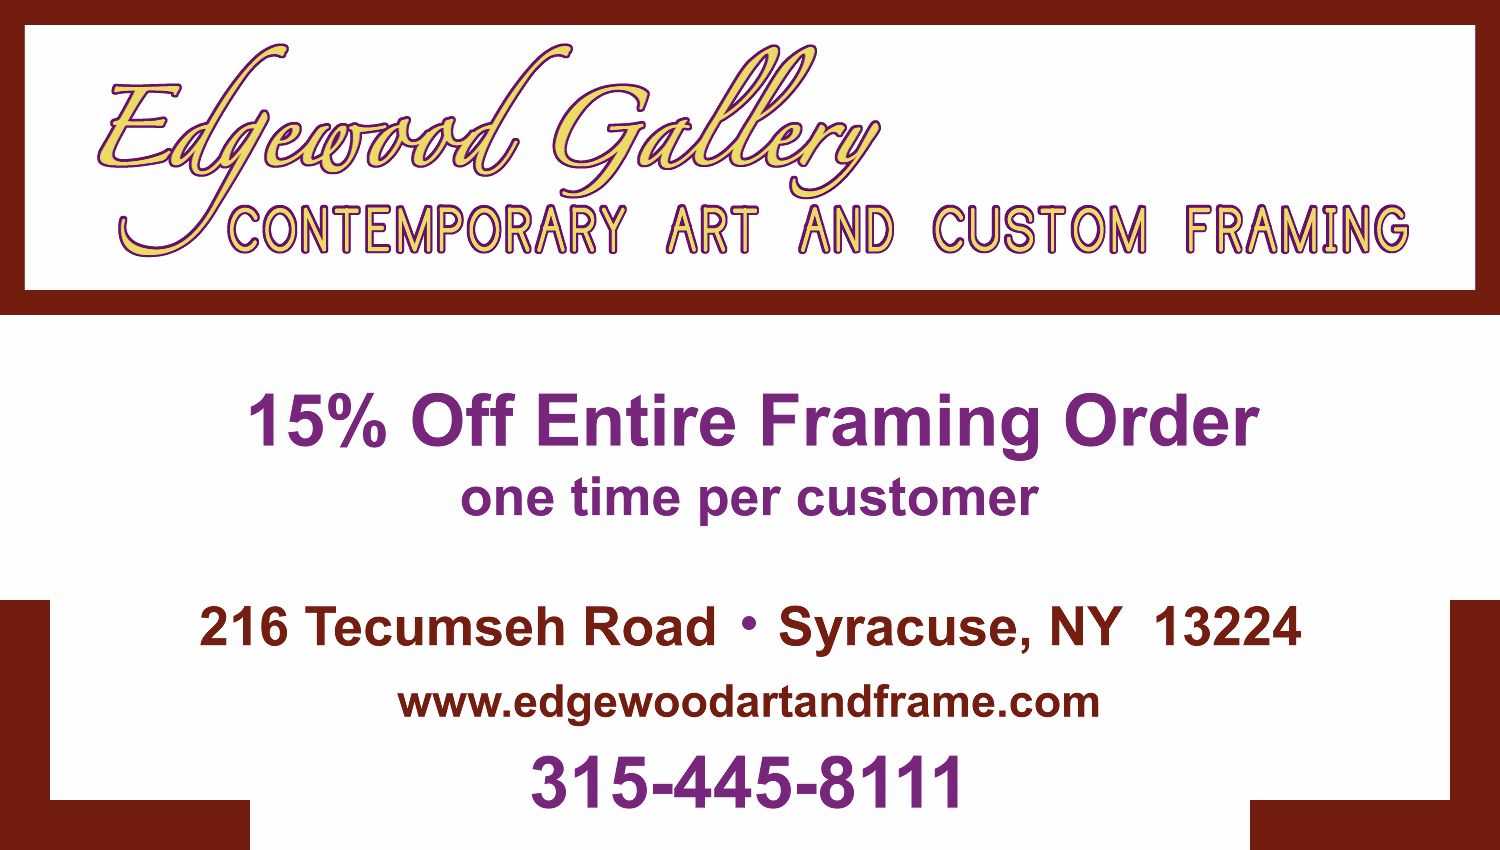 15% off your entire framing order